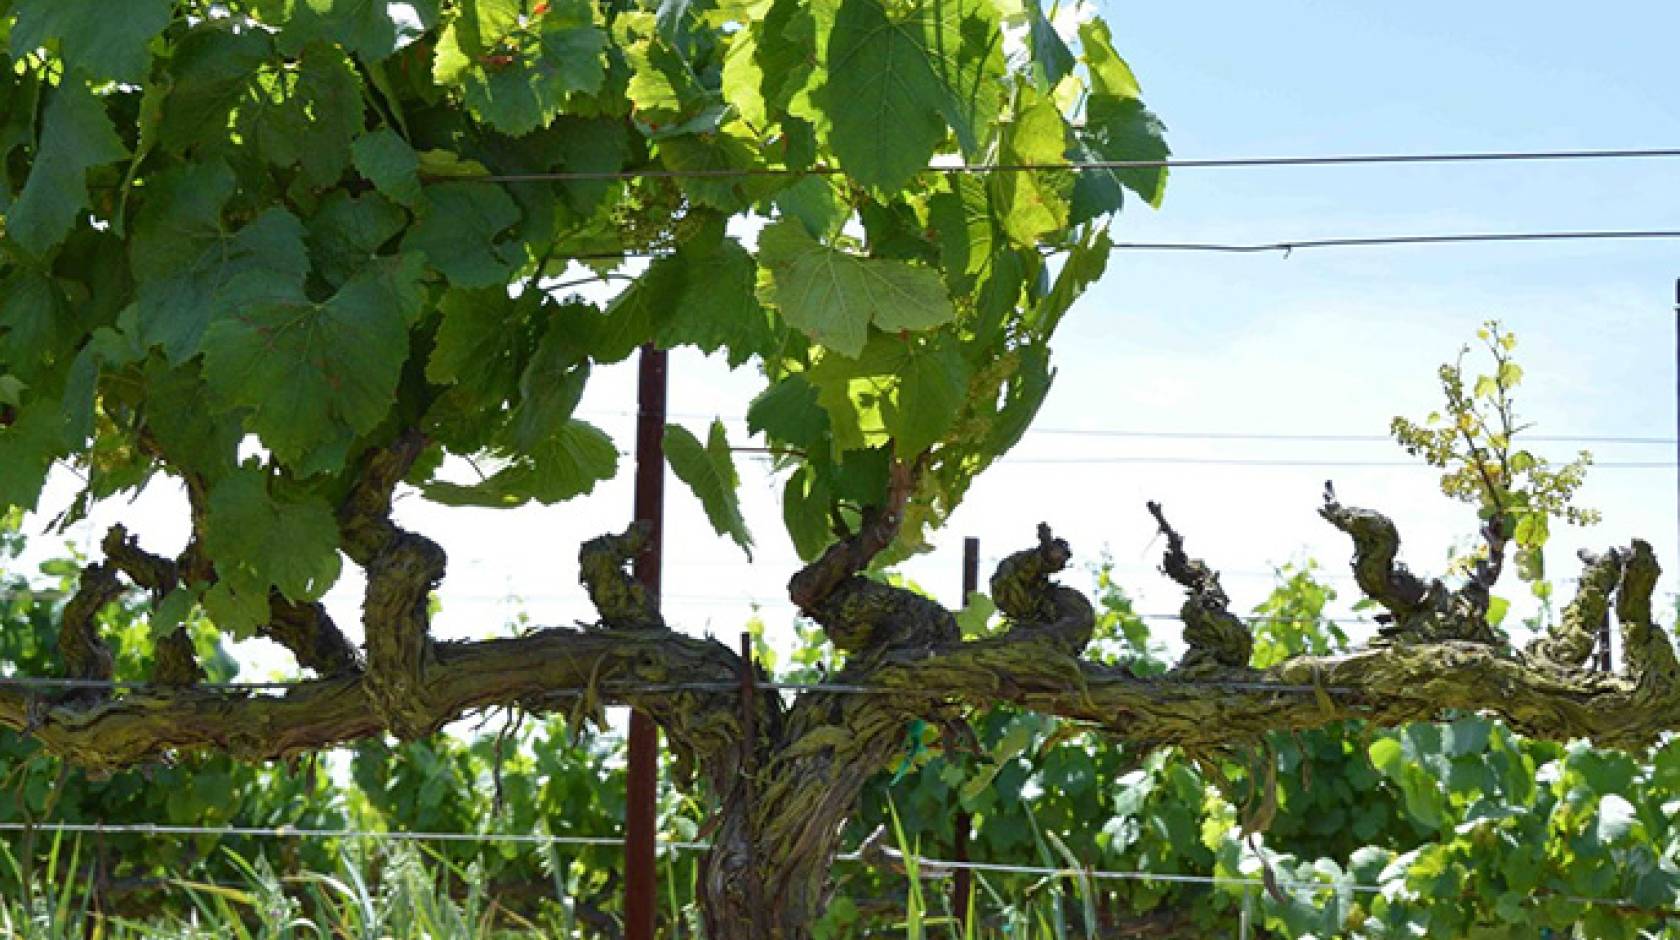 Temecula-based Agrobiomics is commercializing a sealant developed by UC Riverside’s Philippe Rolshausen. The sealant protects grapevines from fungal damage that is shown on the right side of this vine. 